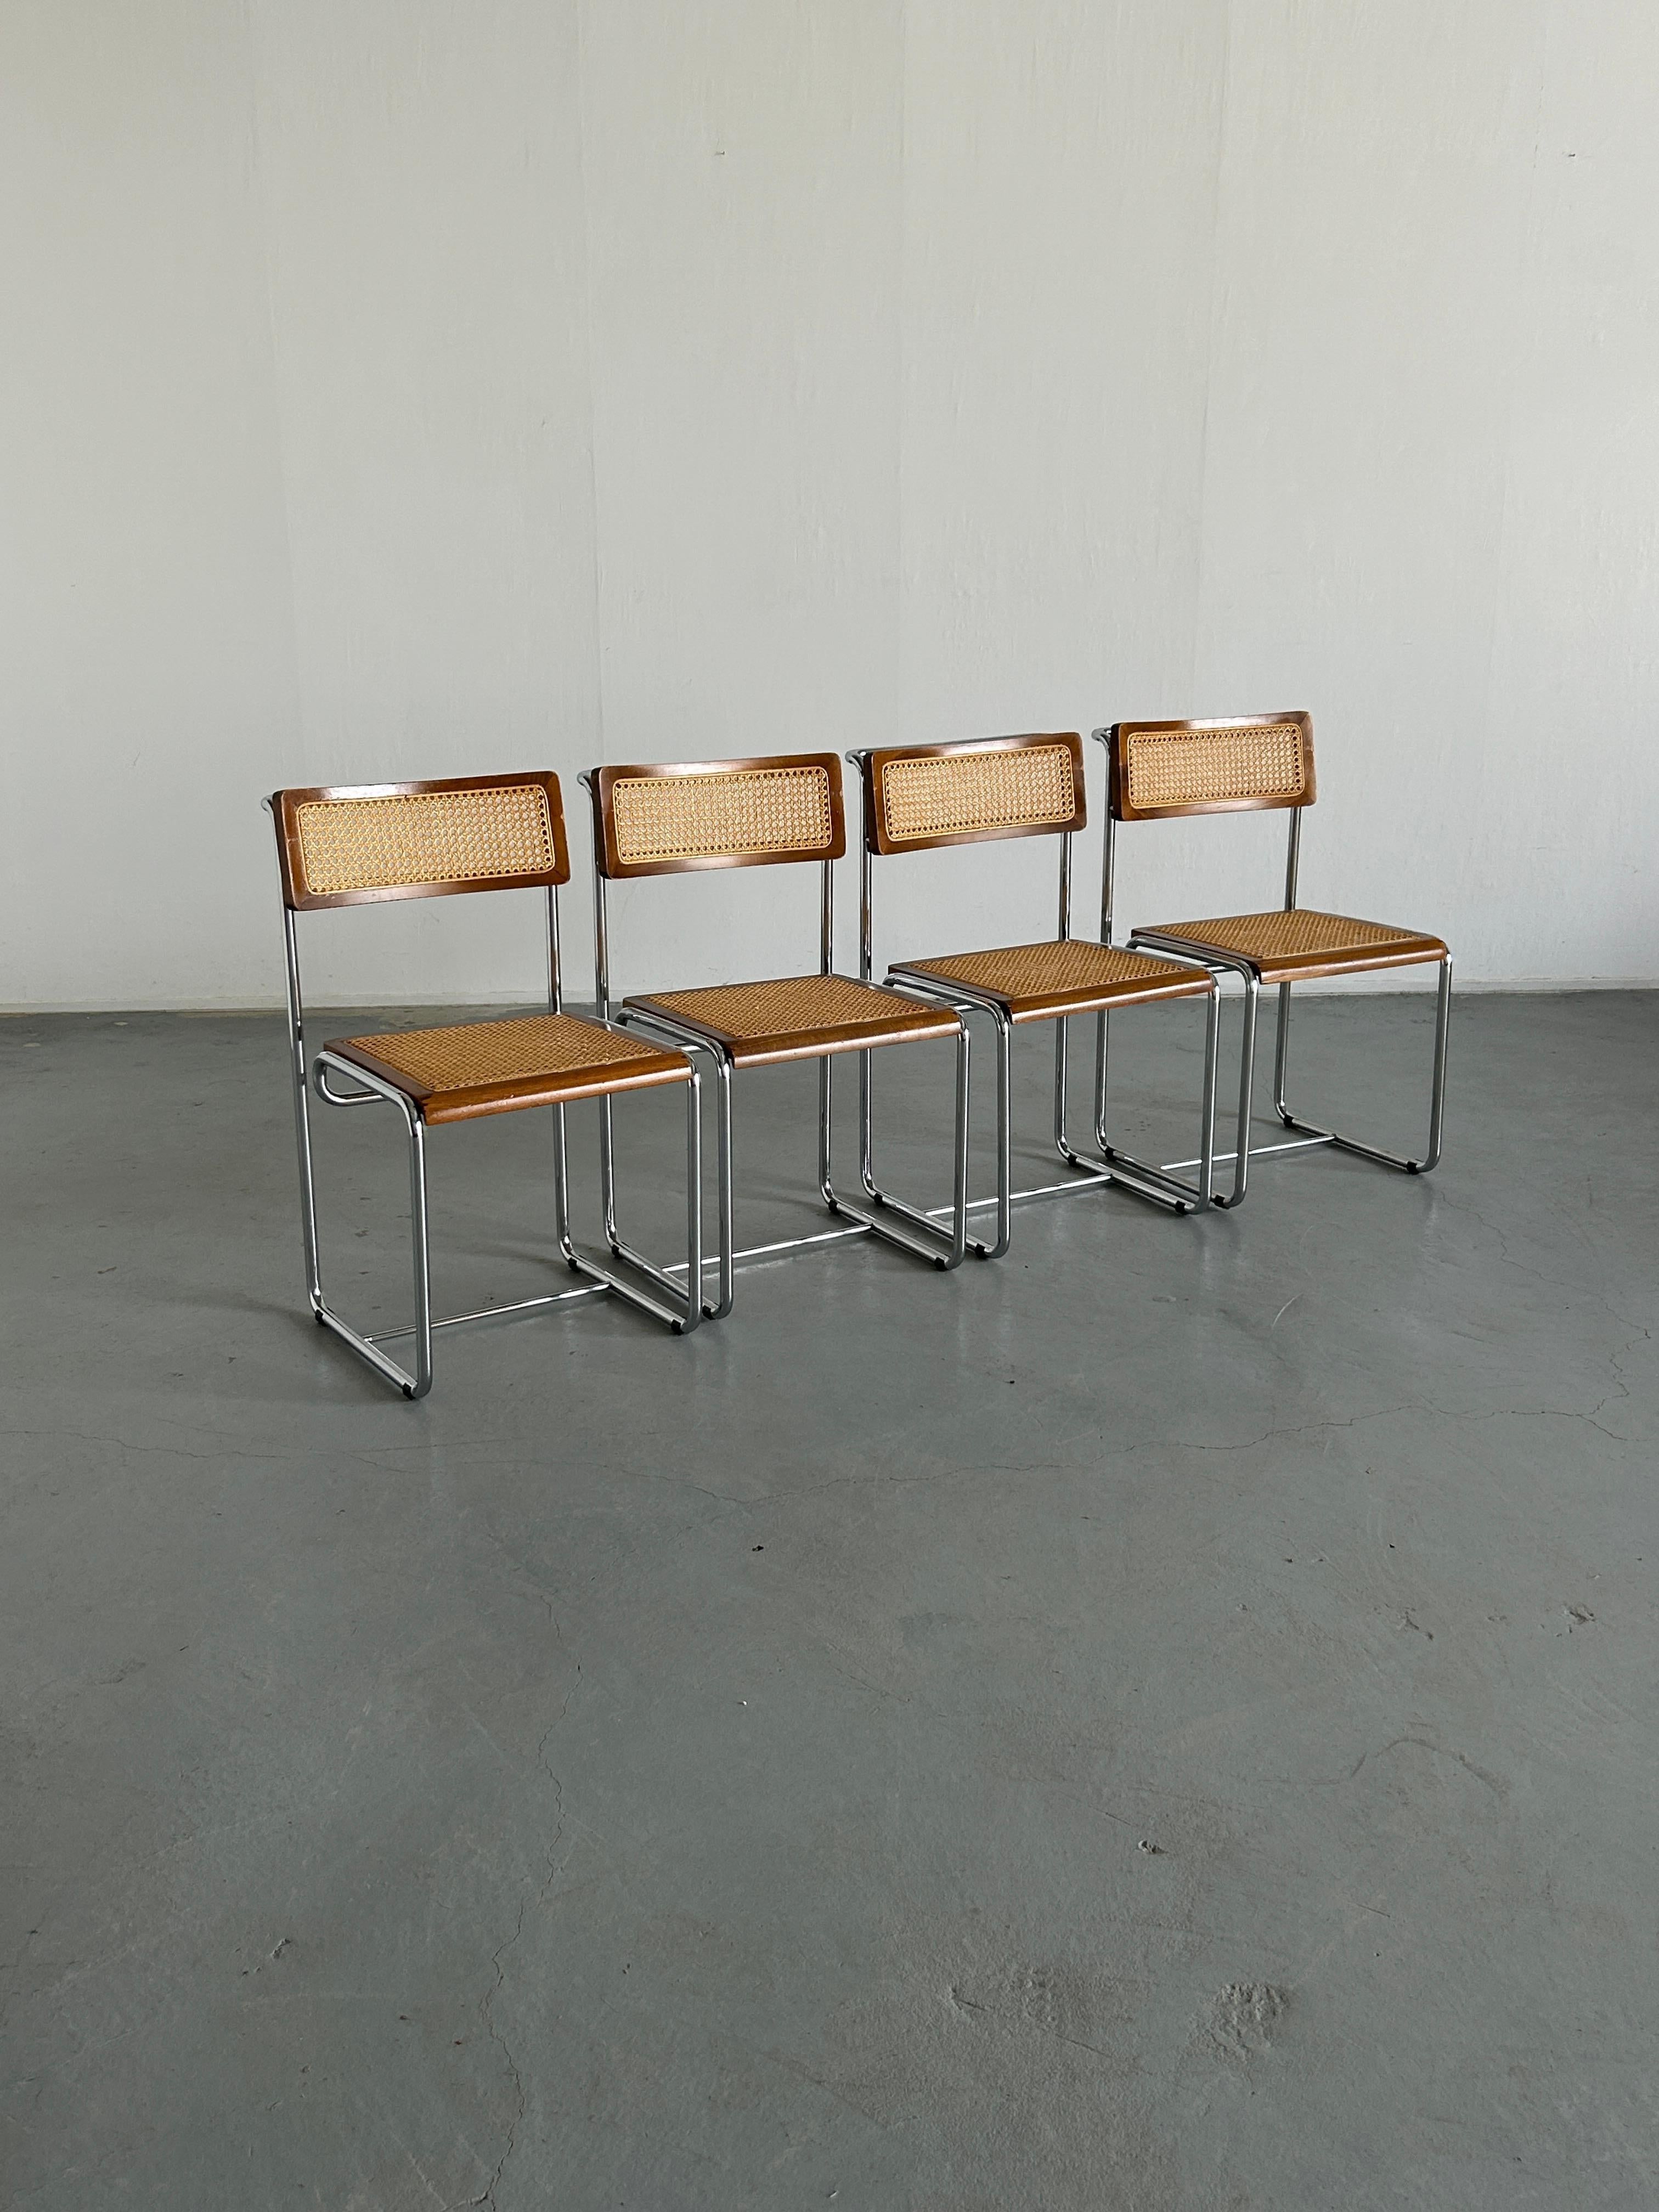 Set of 4 Mid-Century Dining Chairs in Bent Tubular Steel and Wicker Cane, 1960s In Good Condition For Sale In Zagreb, HR